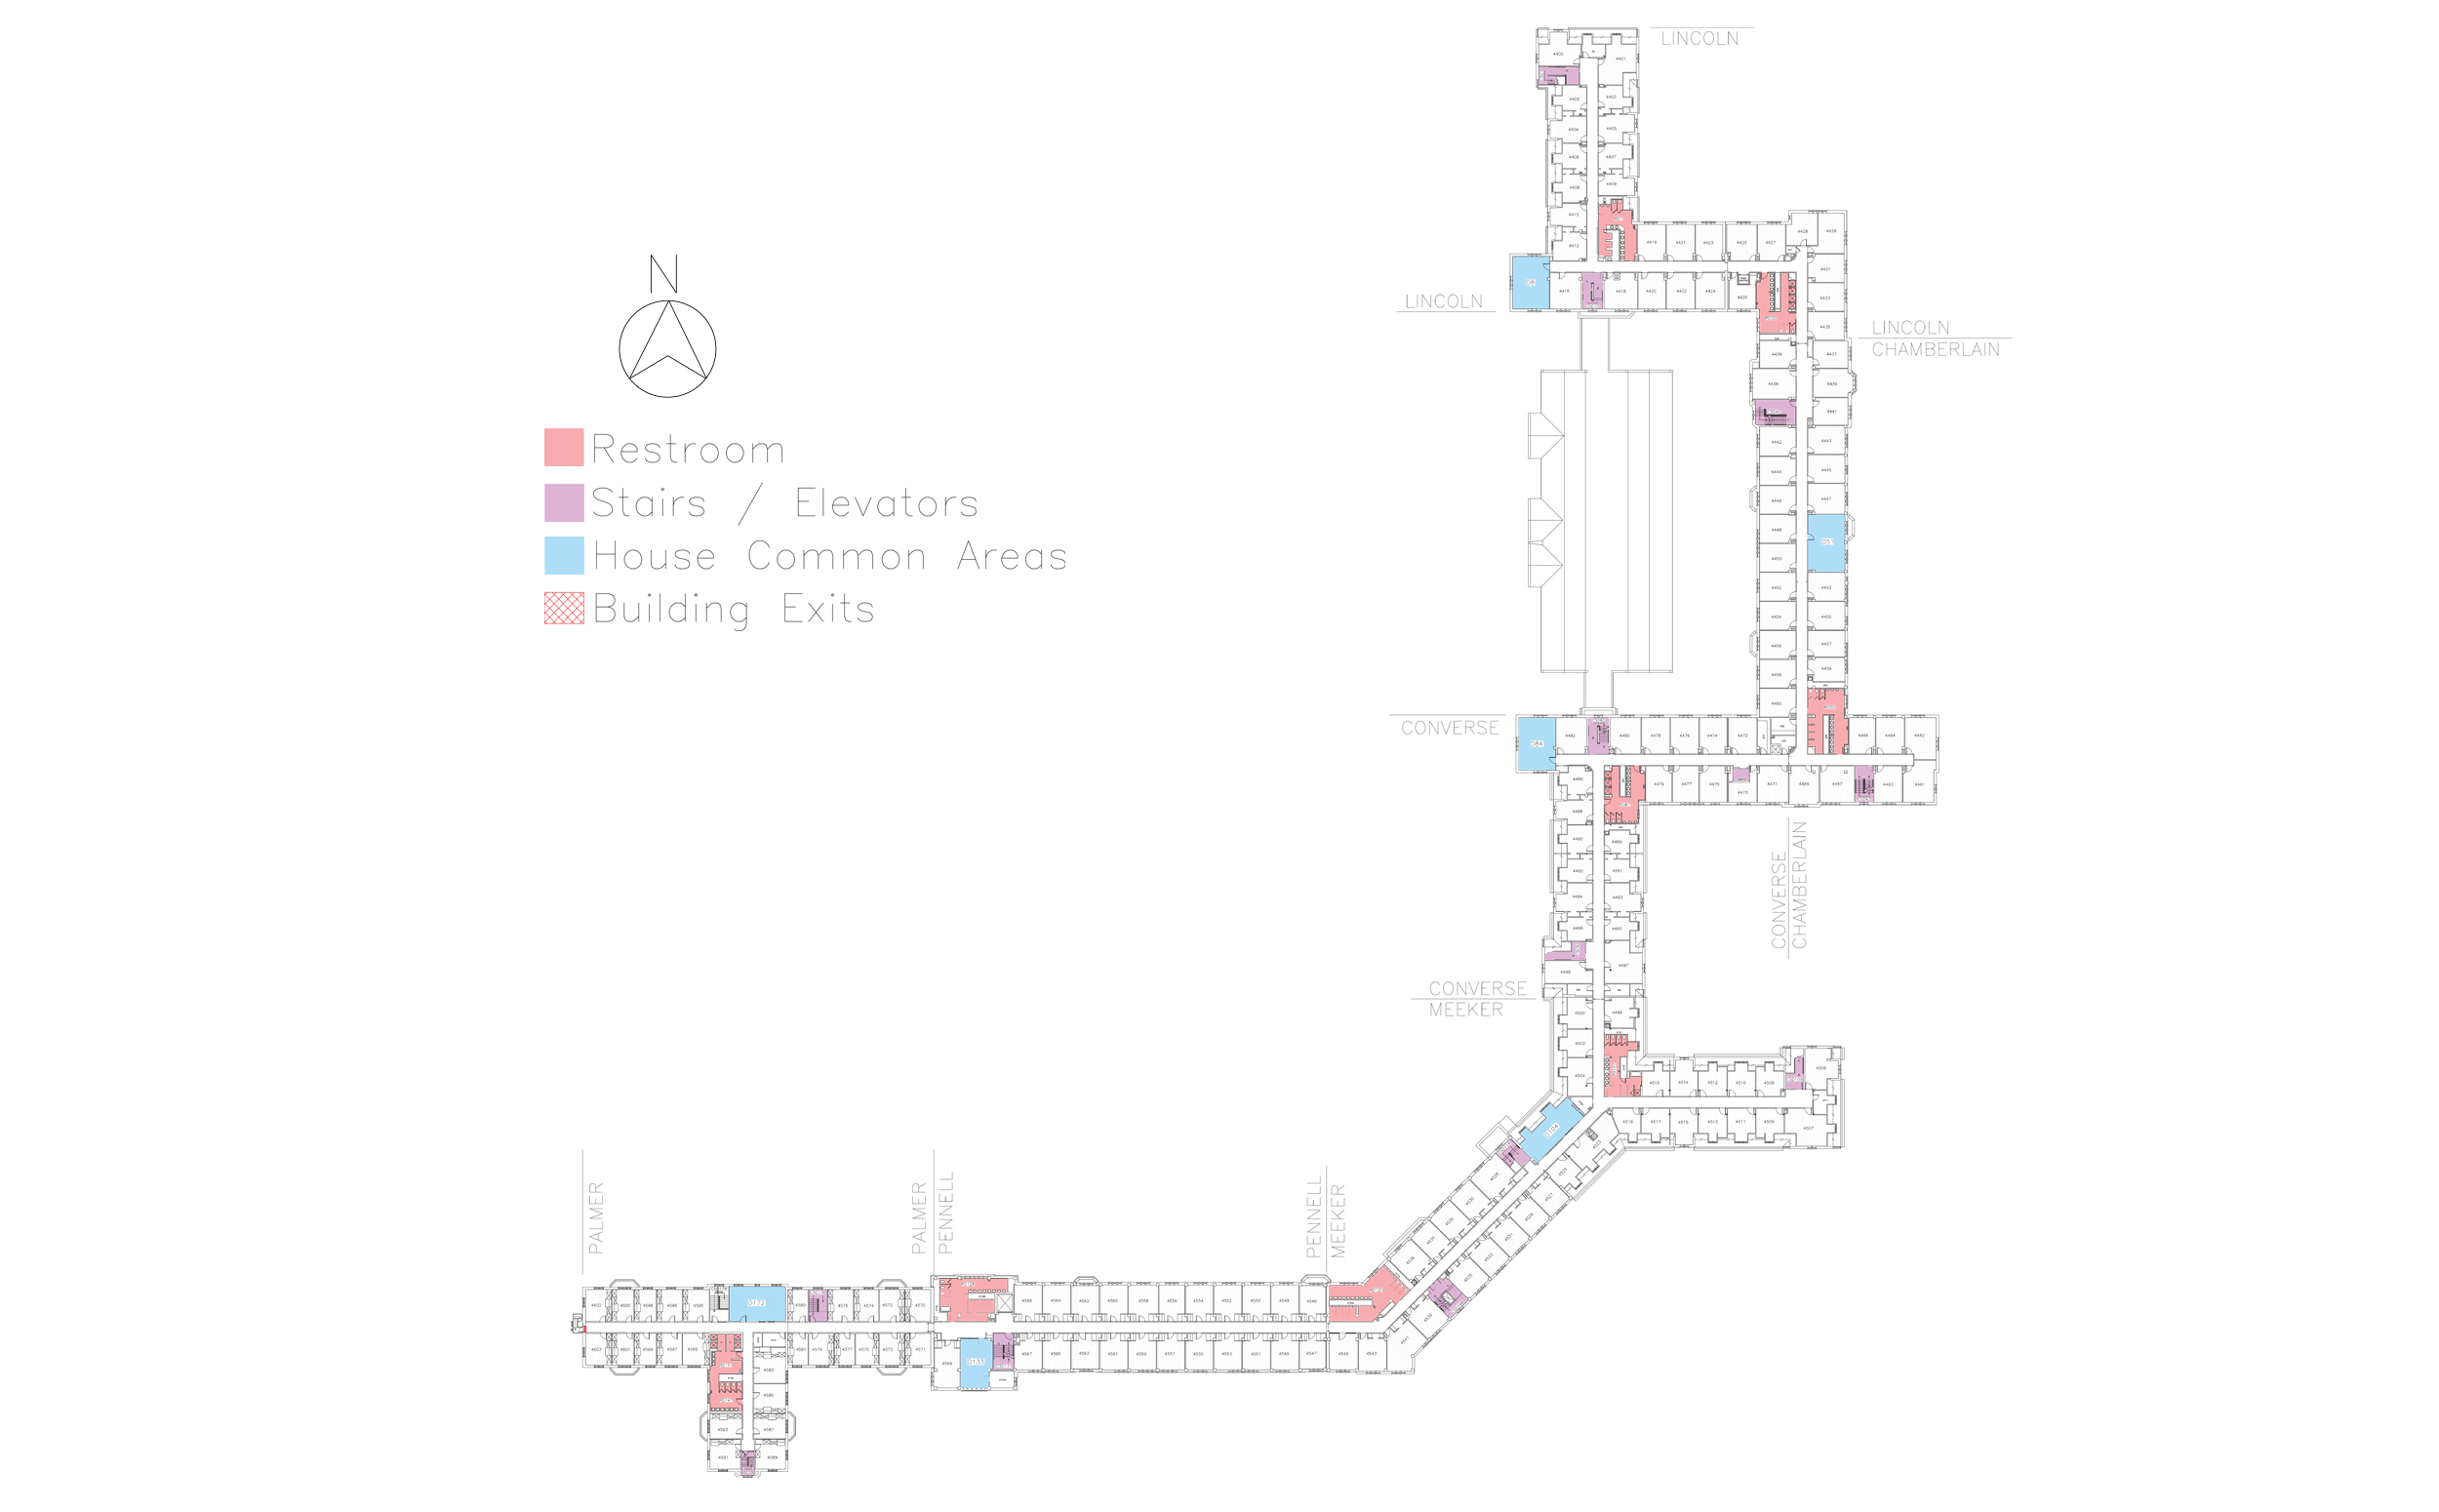 Floor plan showing house locations on the fourth floor of Friley Hall.